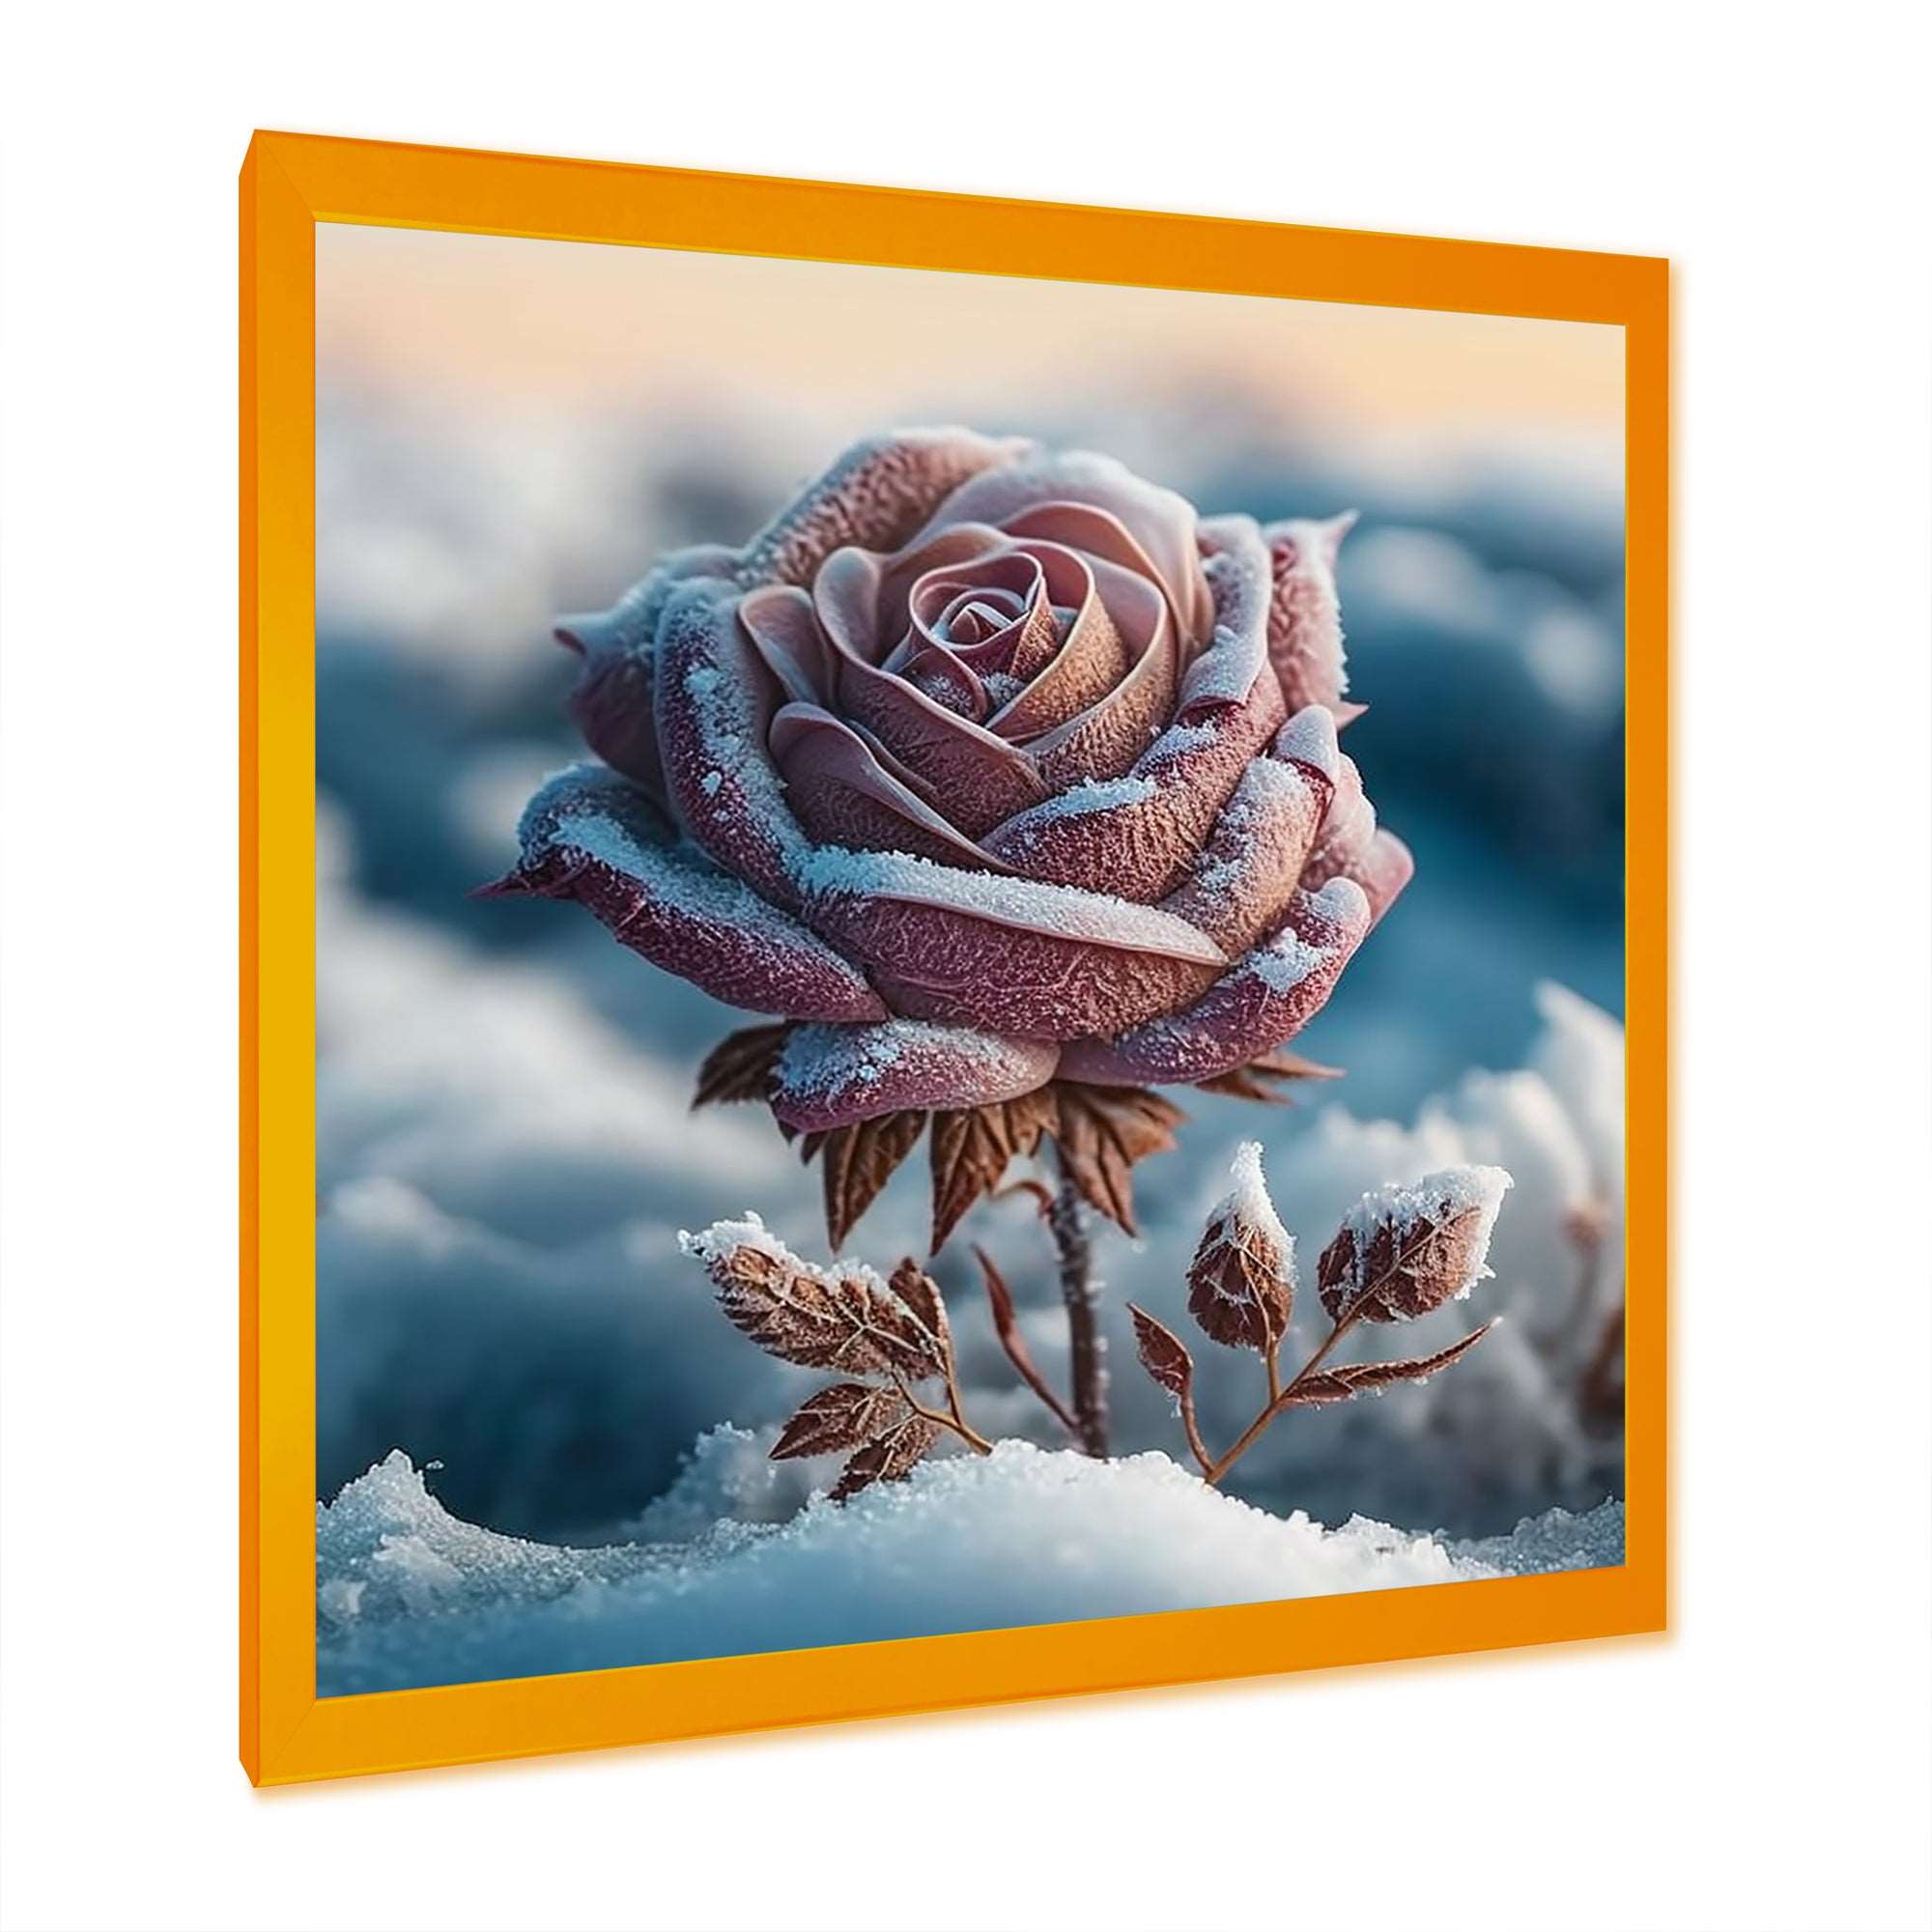 A Blooming Pink Rose Flower In Winter I